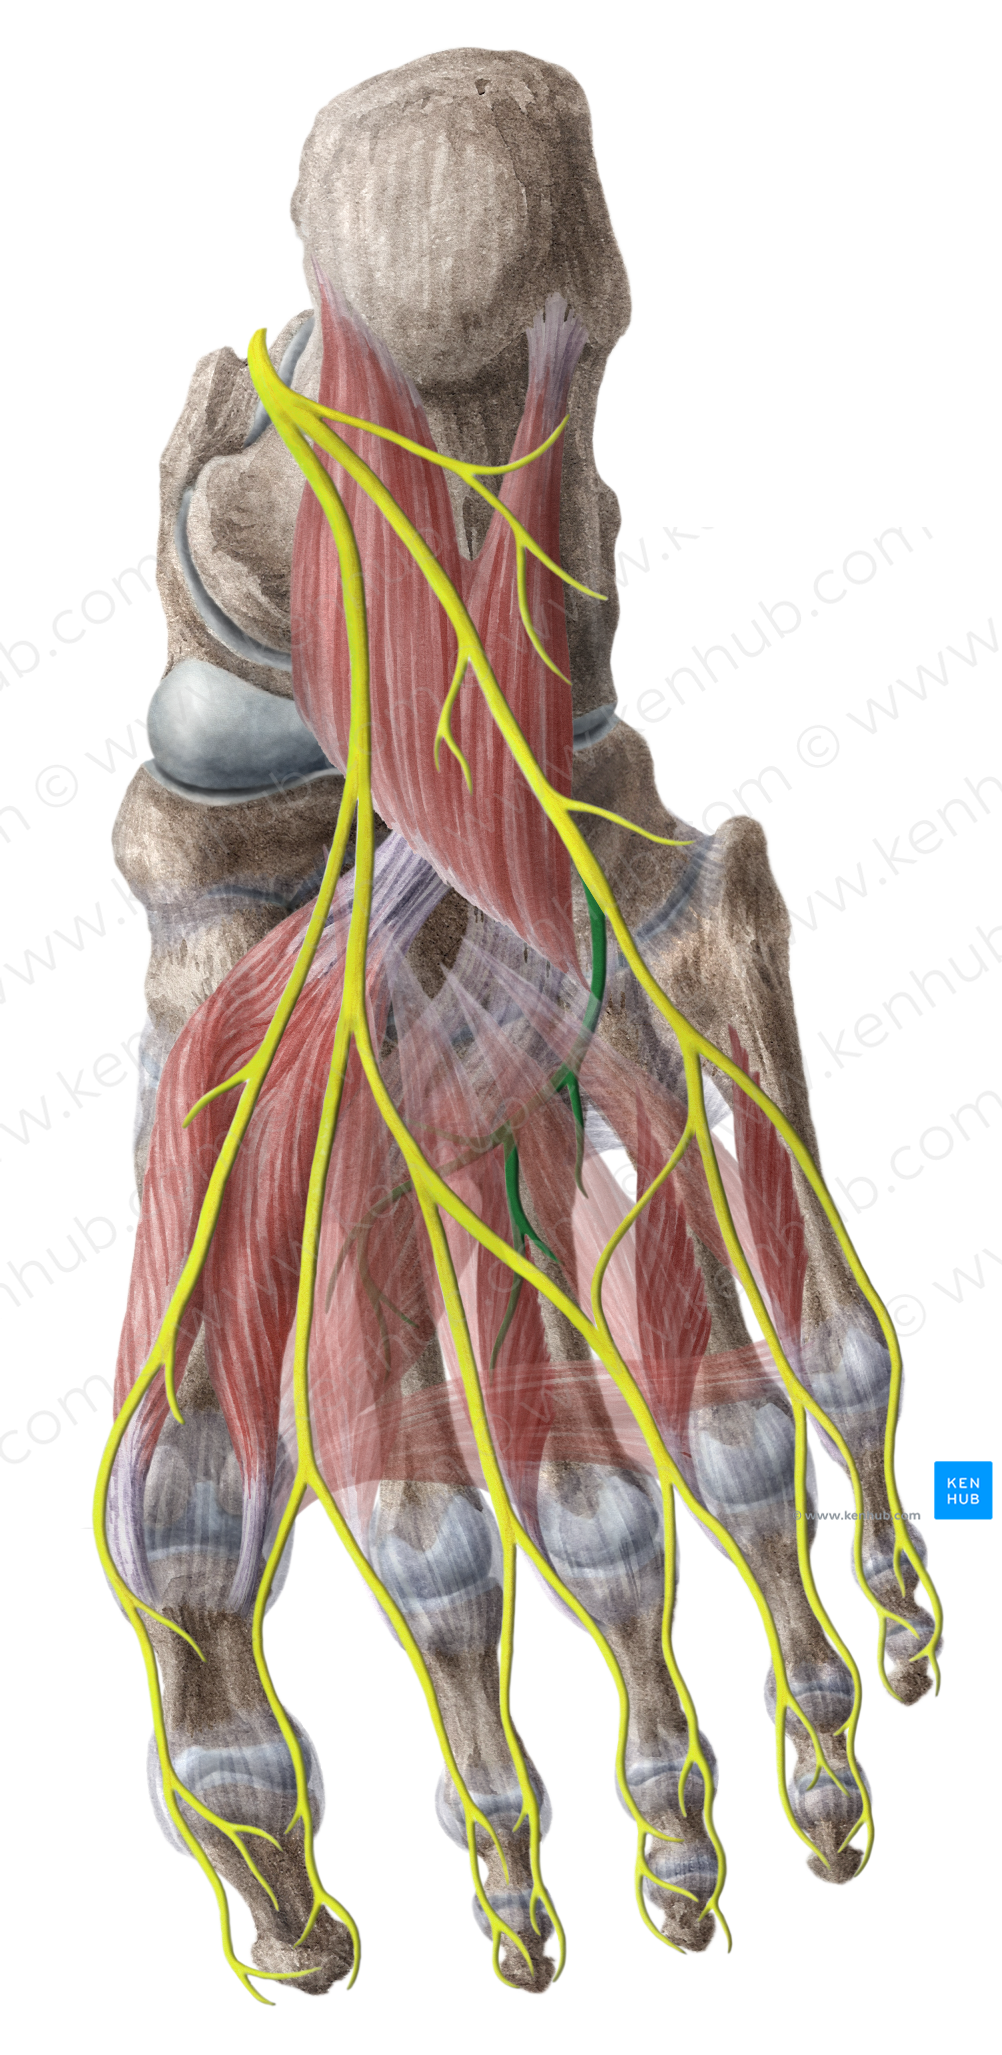 Deep branch of lateral plantar nerve (#8785)